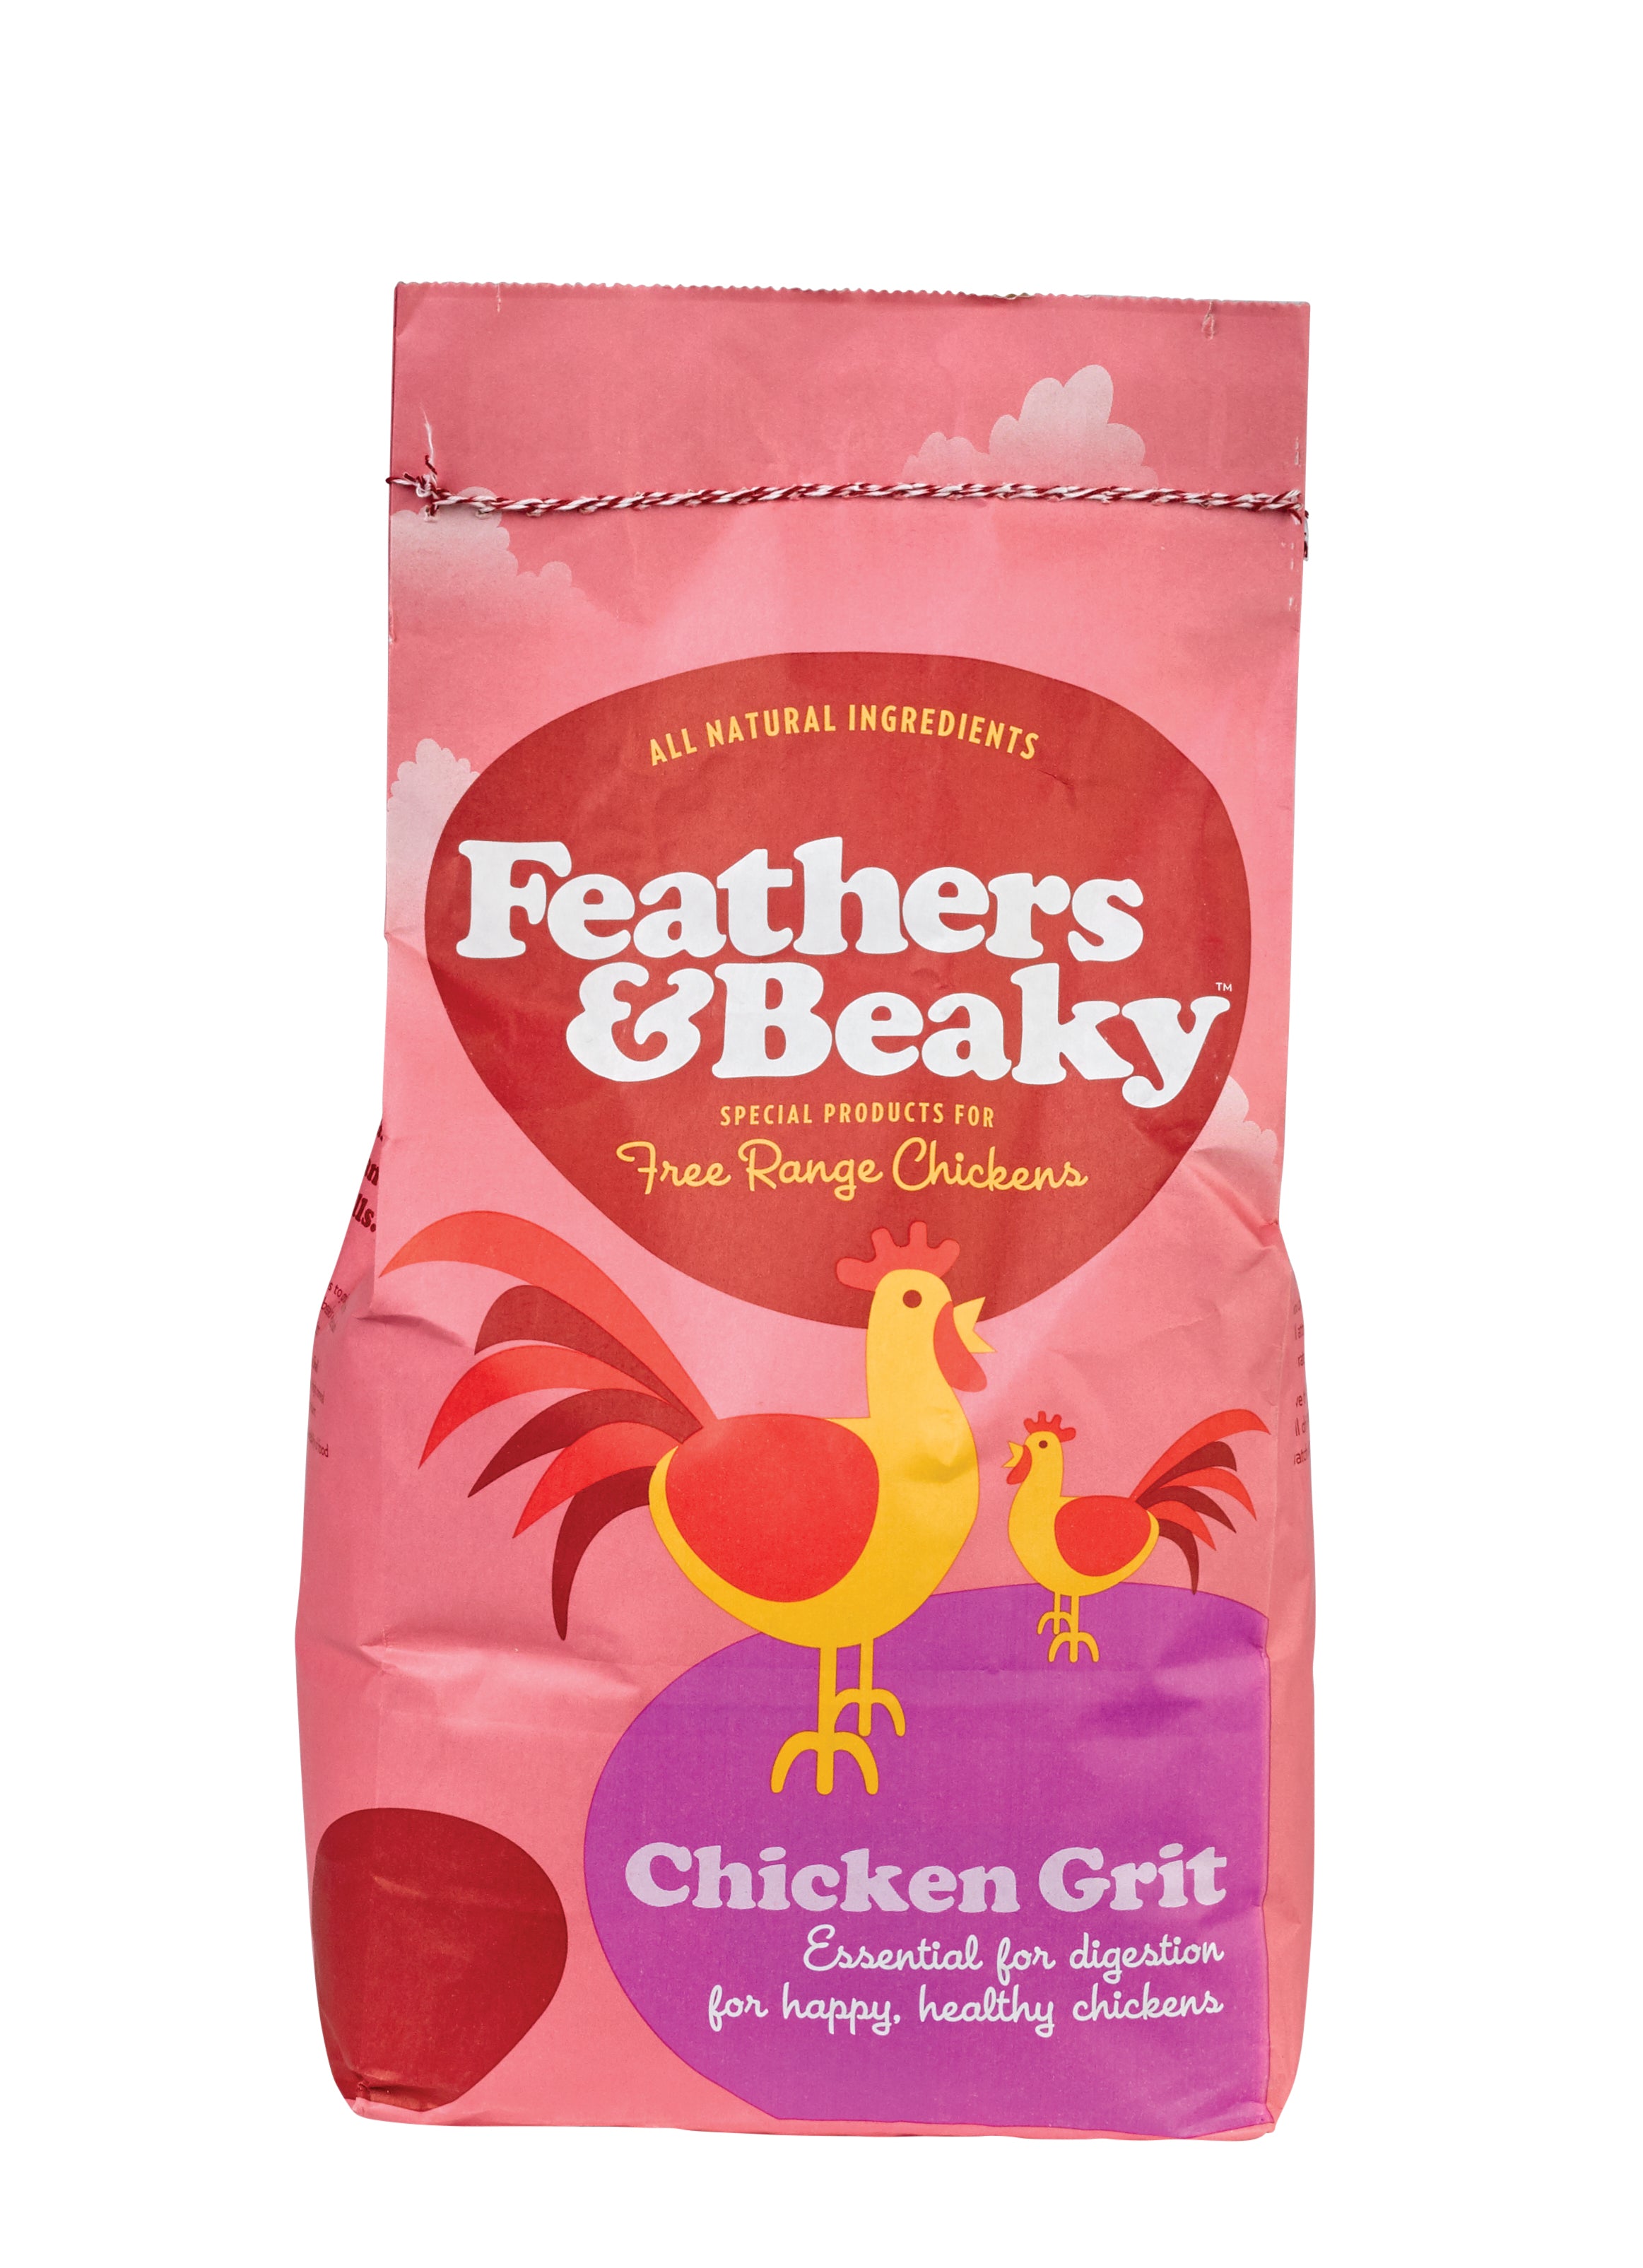 Feathers & Beaky Chicken Grit